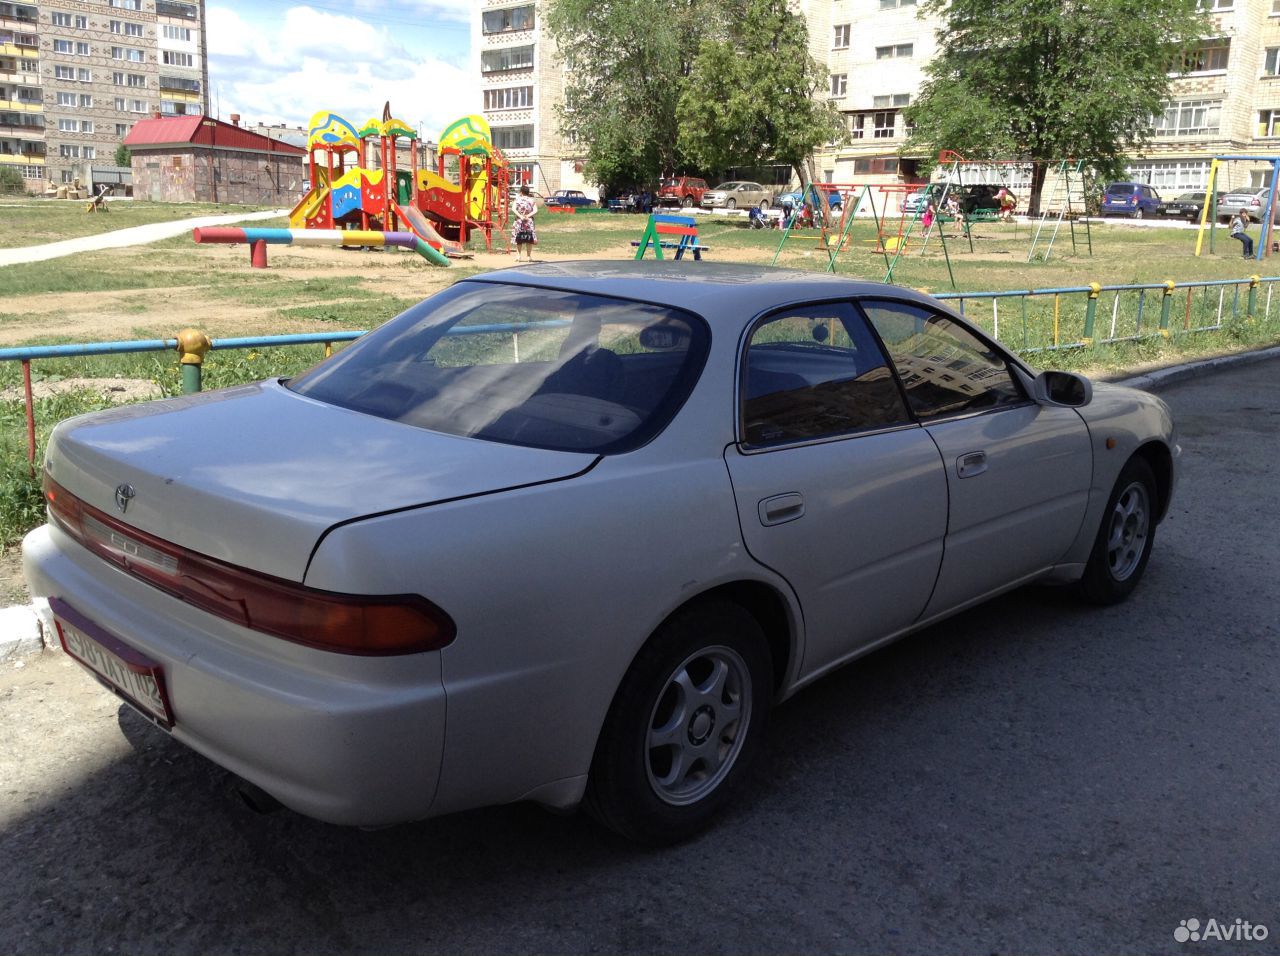 1995 Toyota carina pictures